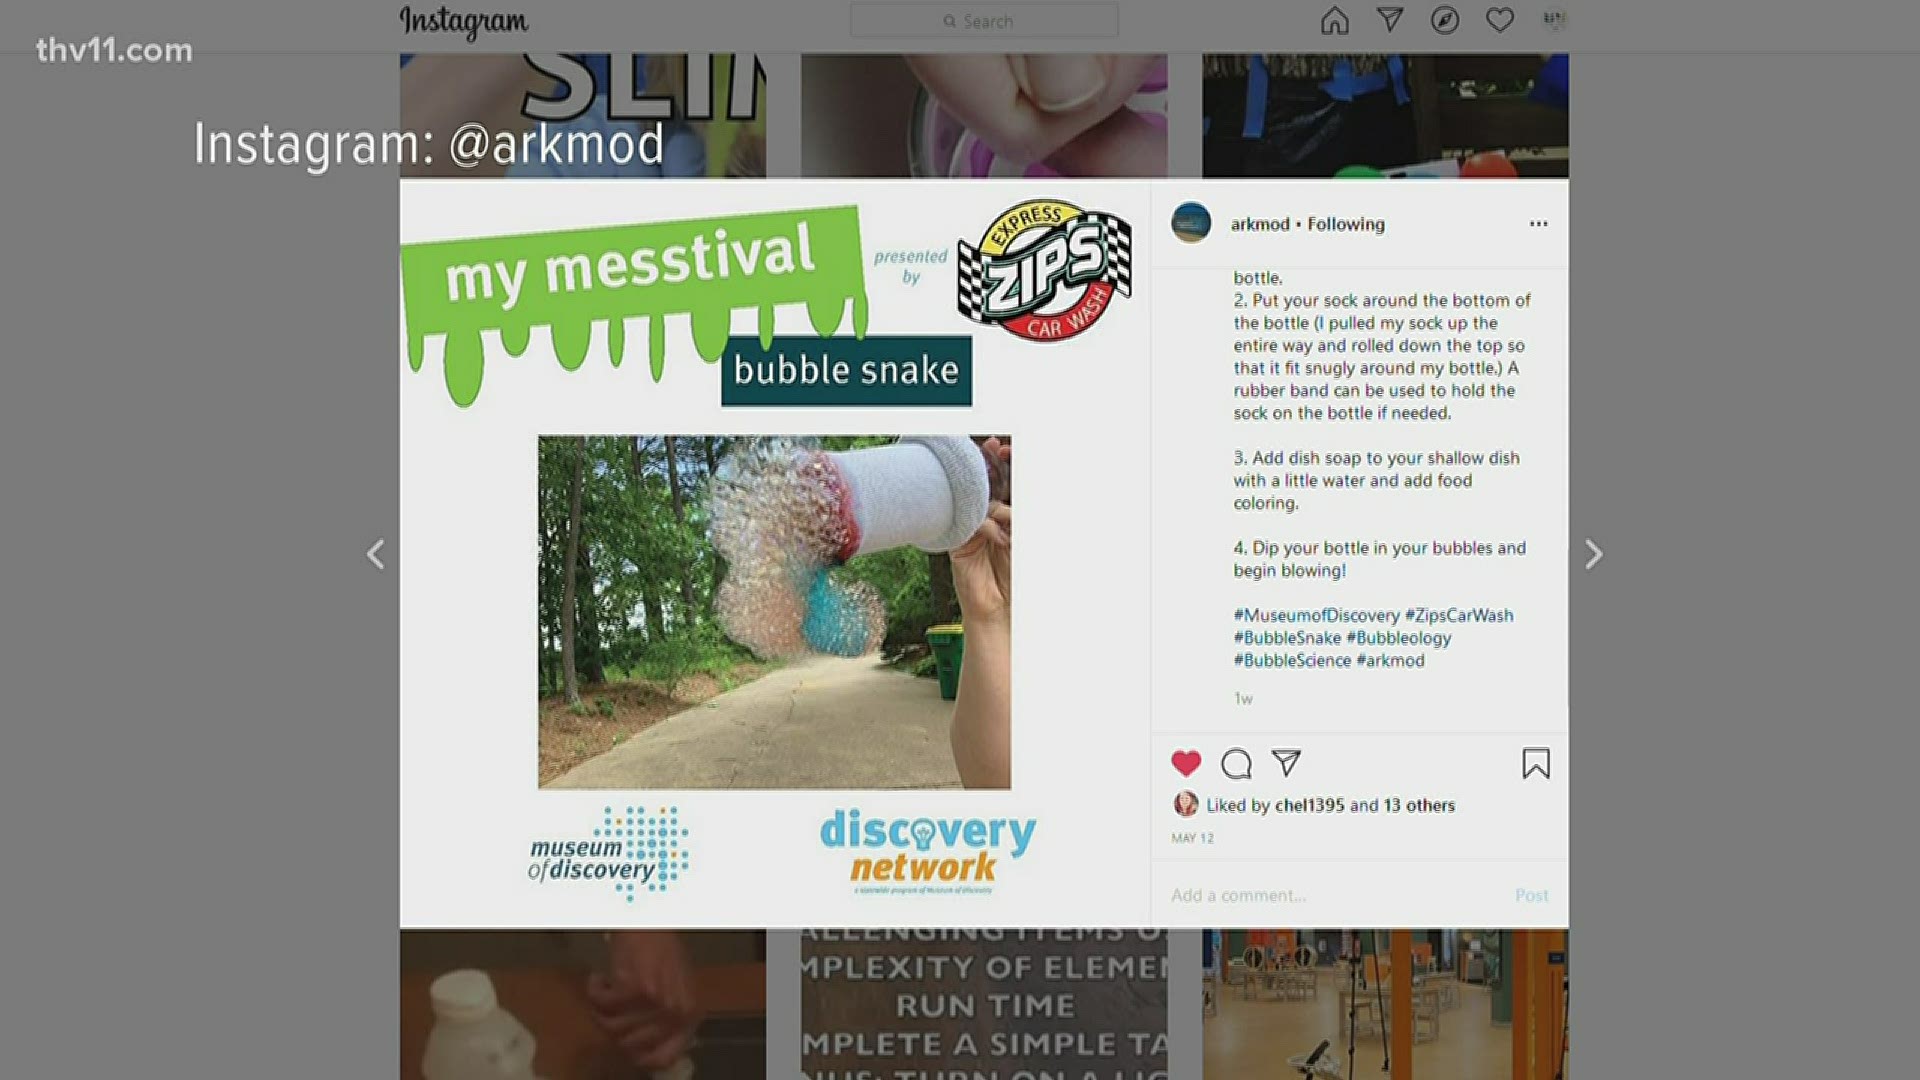 The Museum of Discovery has lots of great ideas for you and your kids to enjoy the fun of Messtival at home.